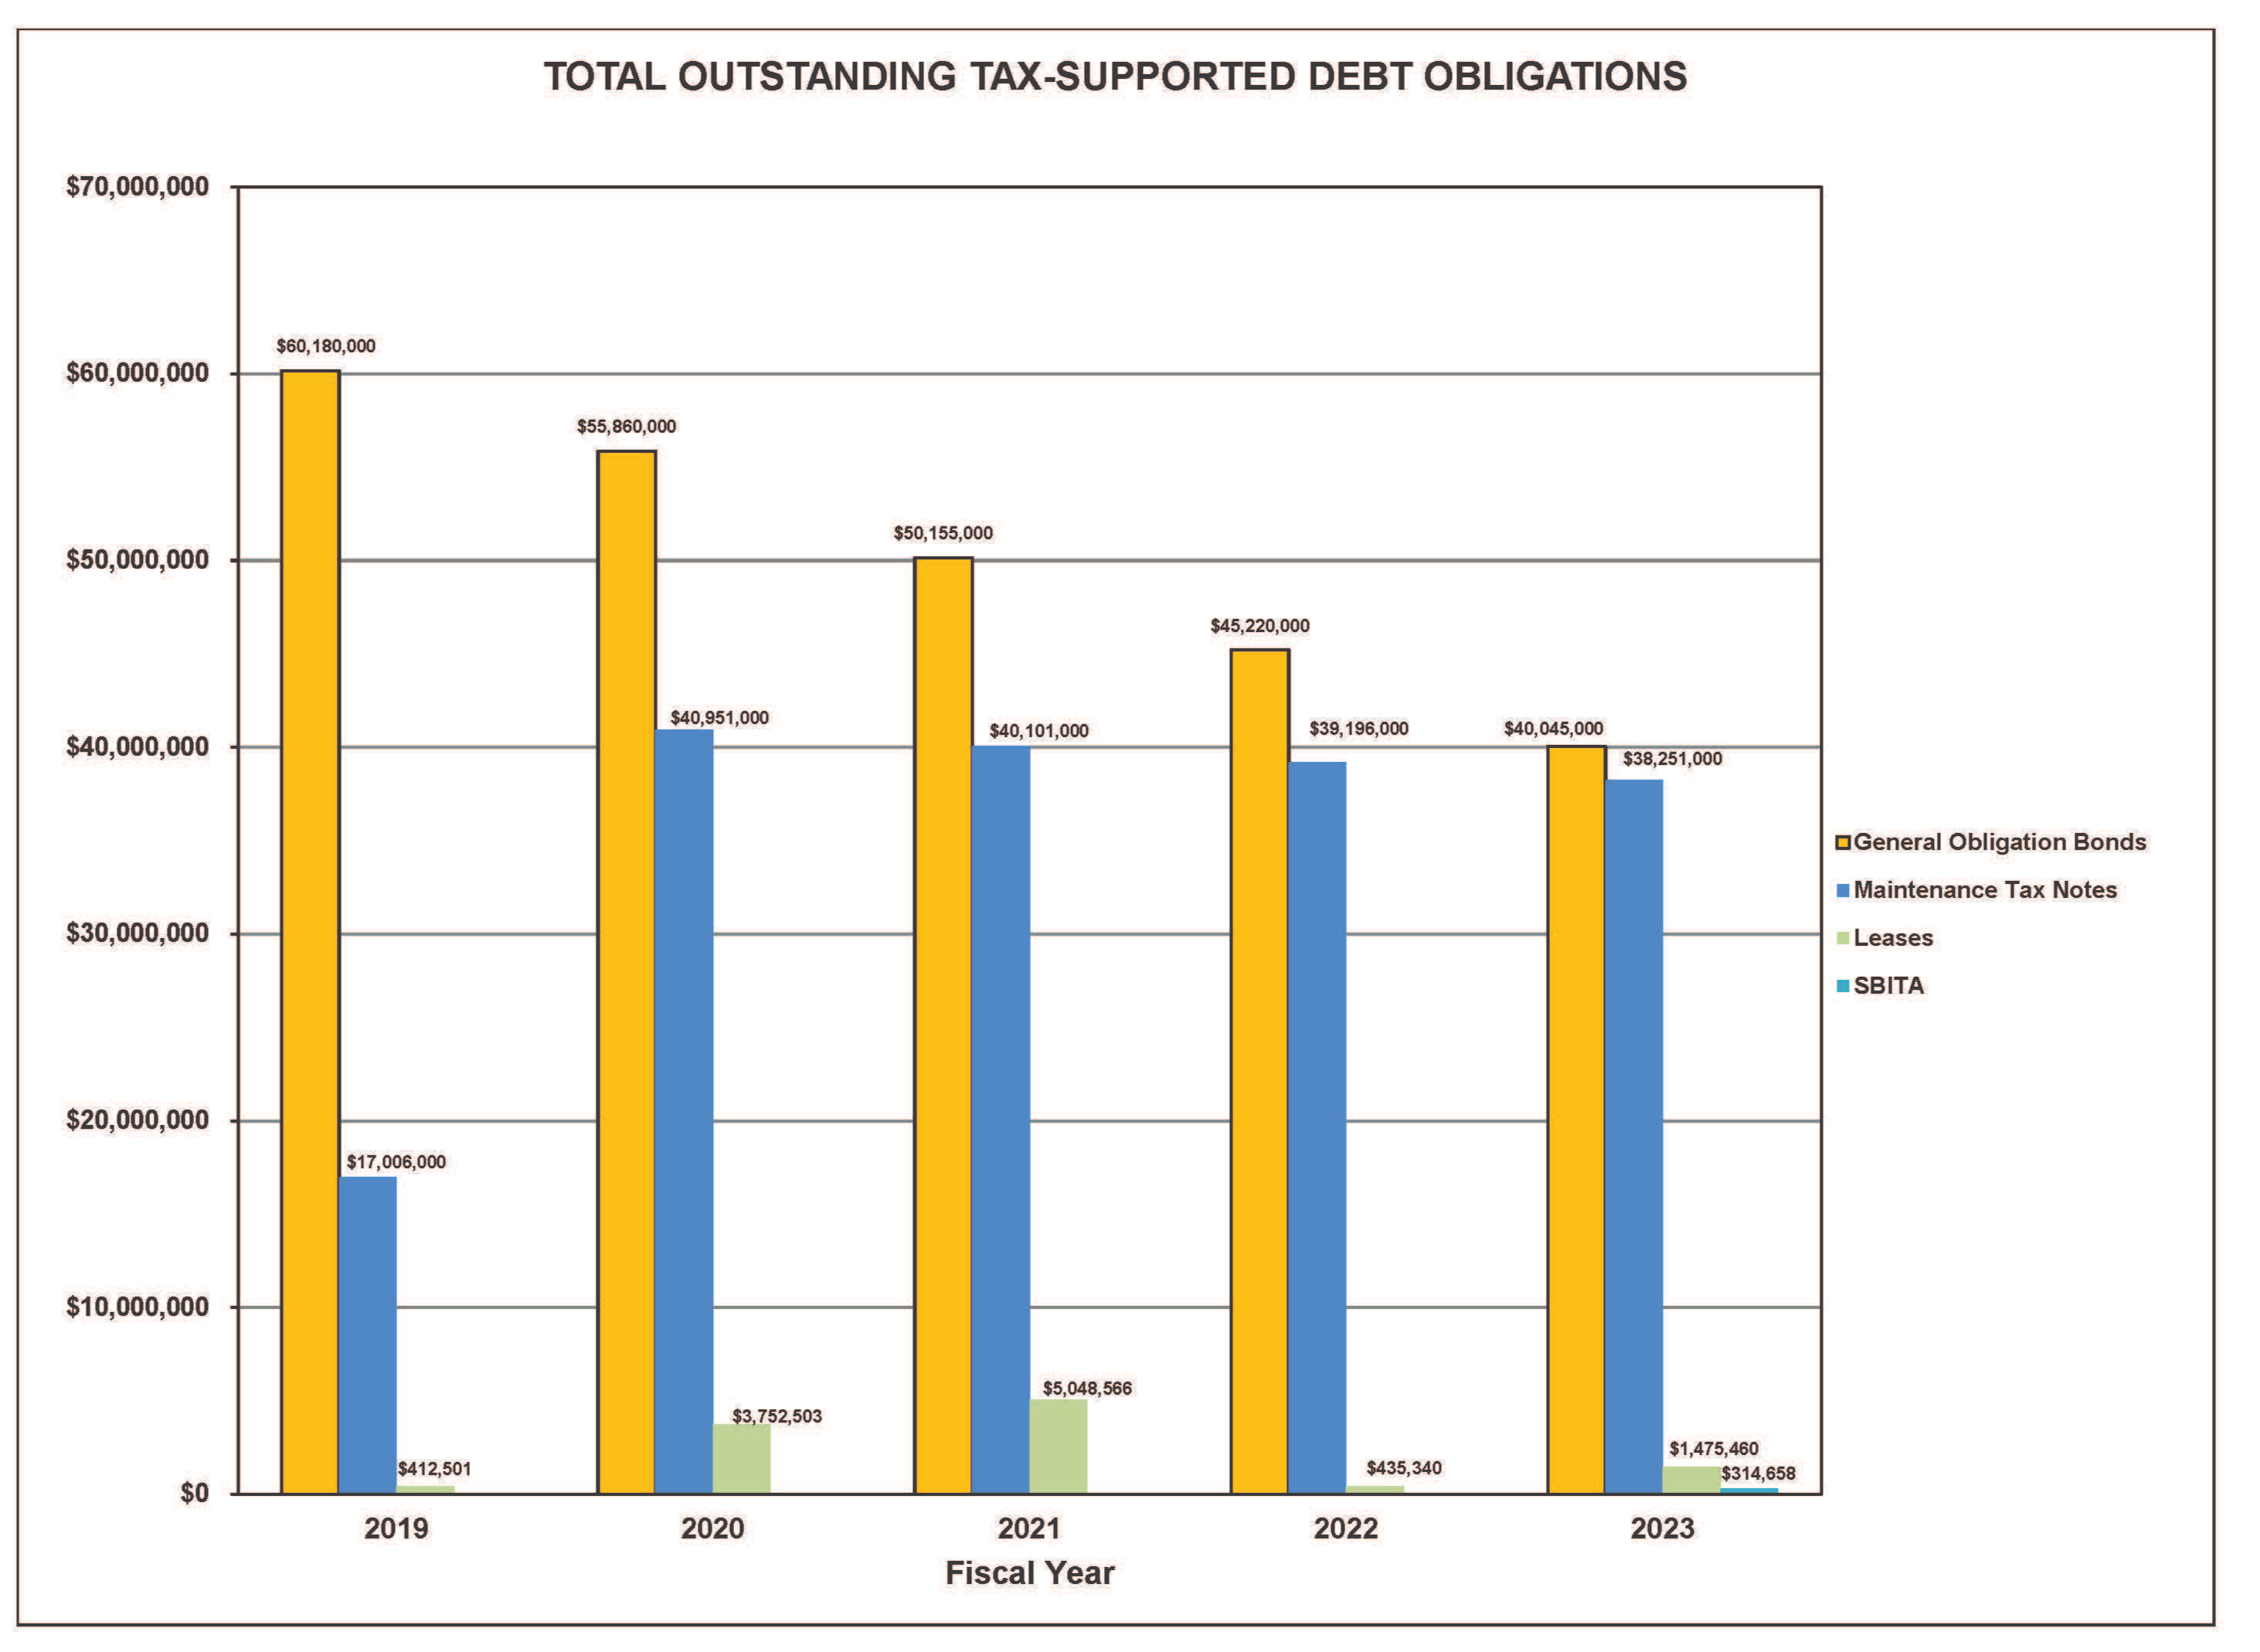 Total Outstanding Tax-Supported Debt Obligations